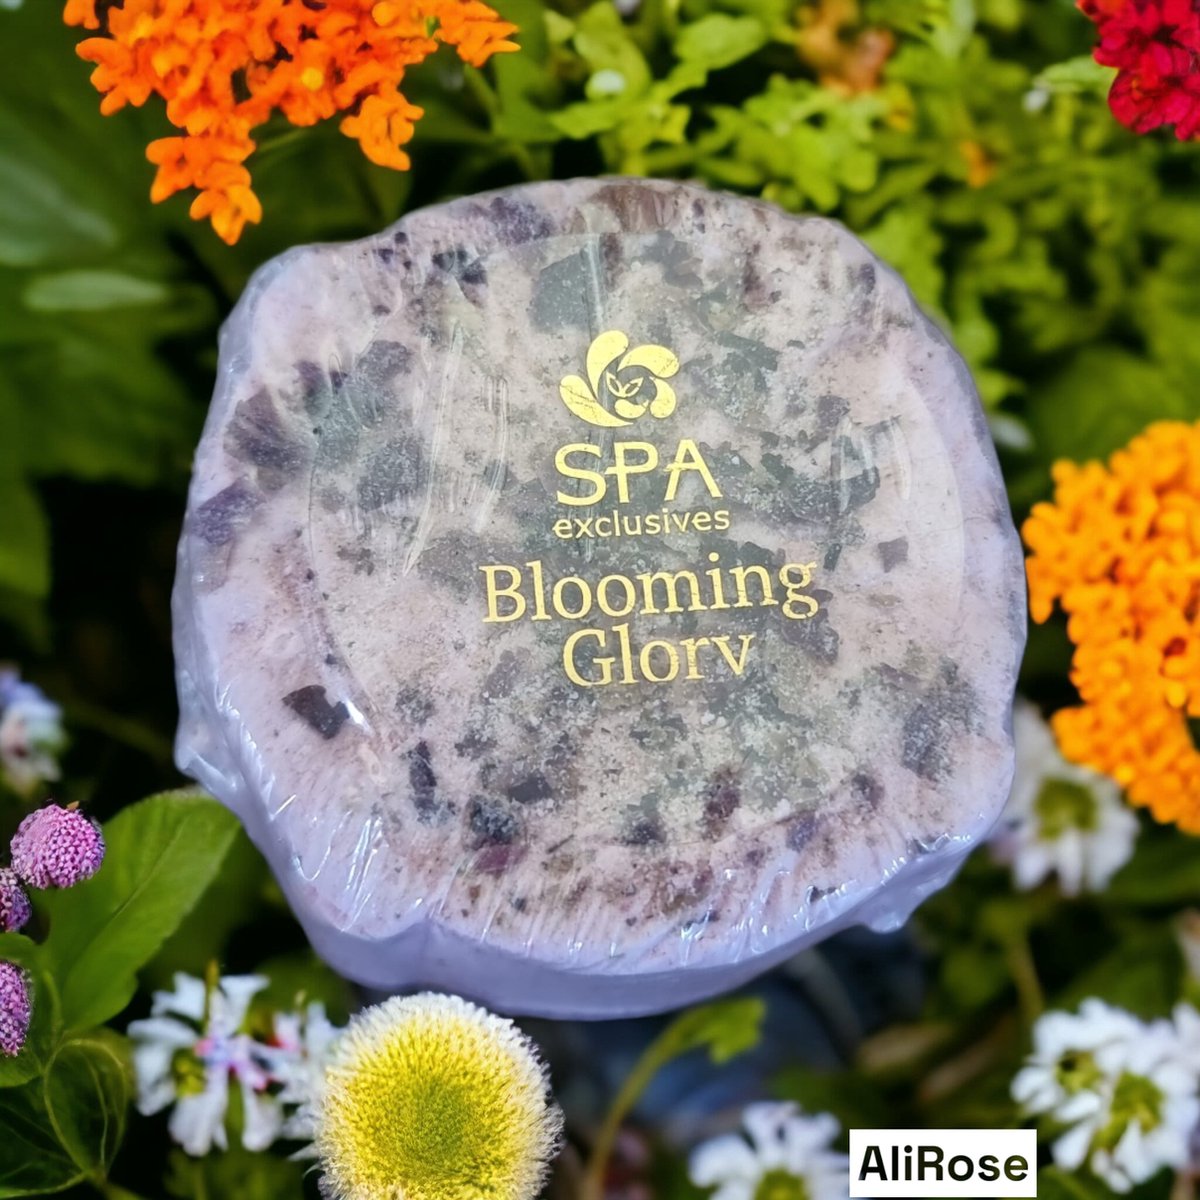 Spa exclusives - Blooming Glory - AliRose